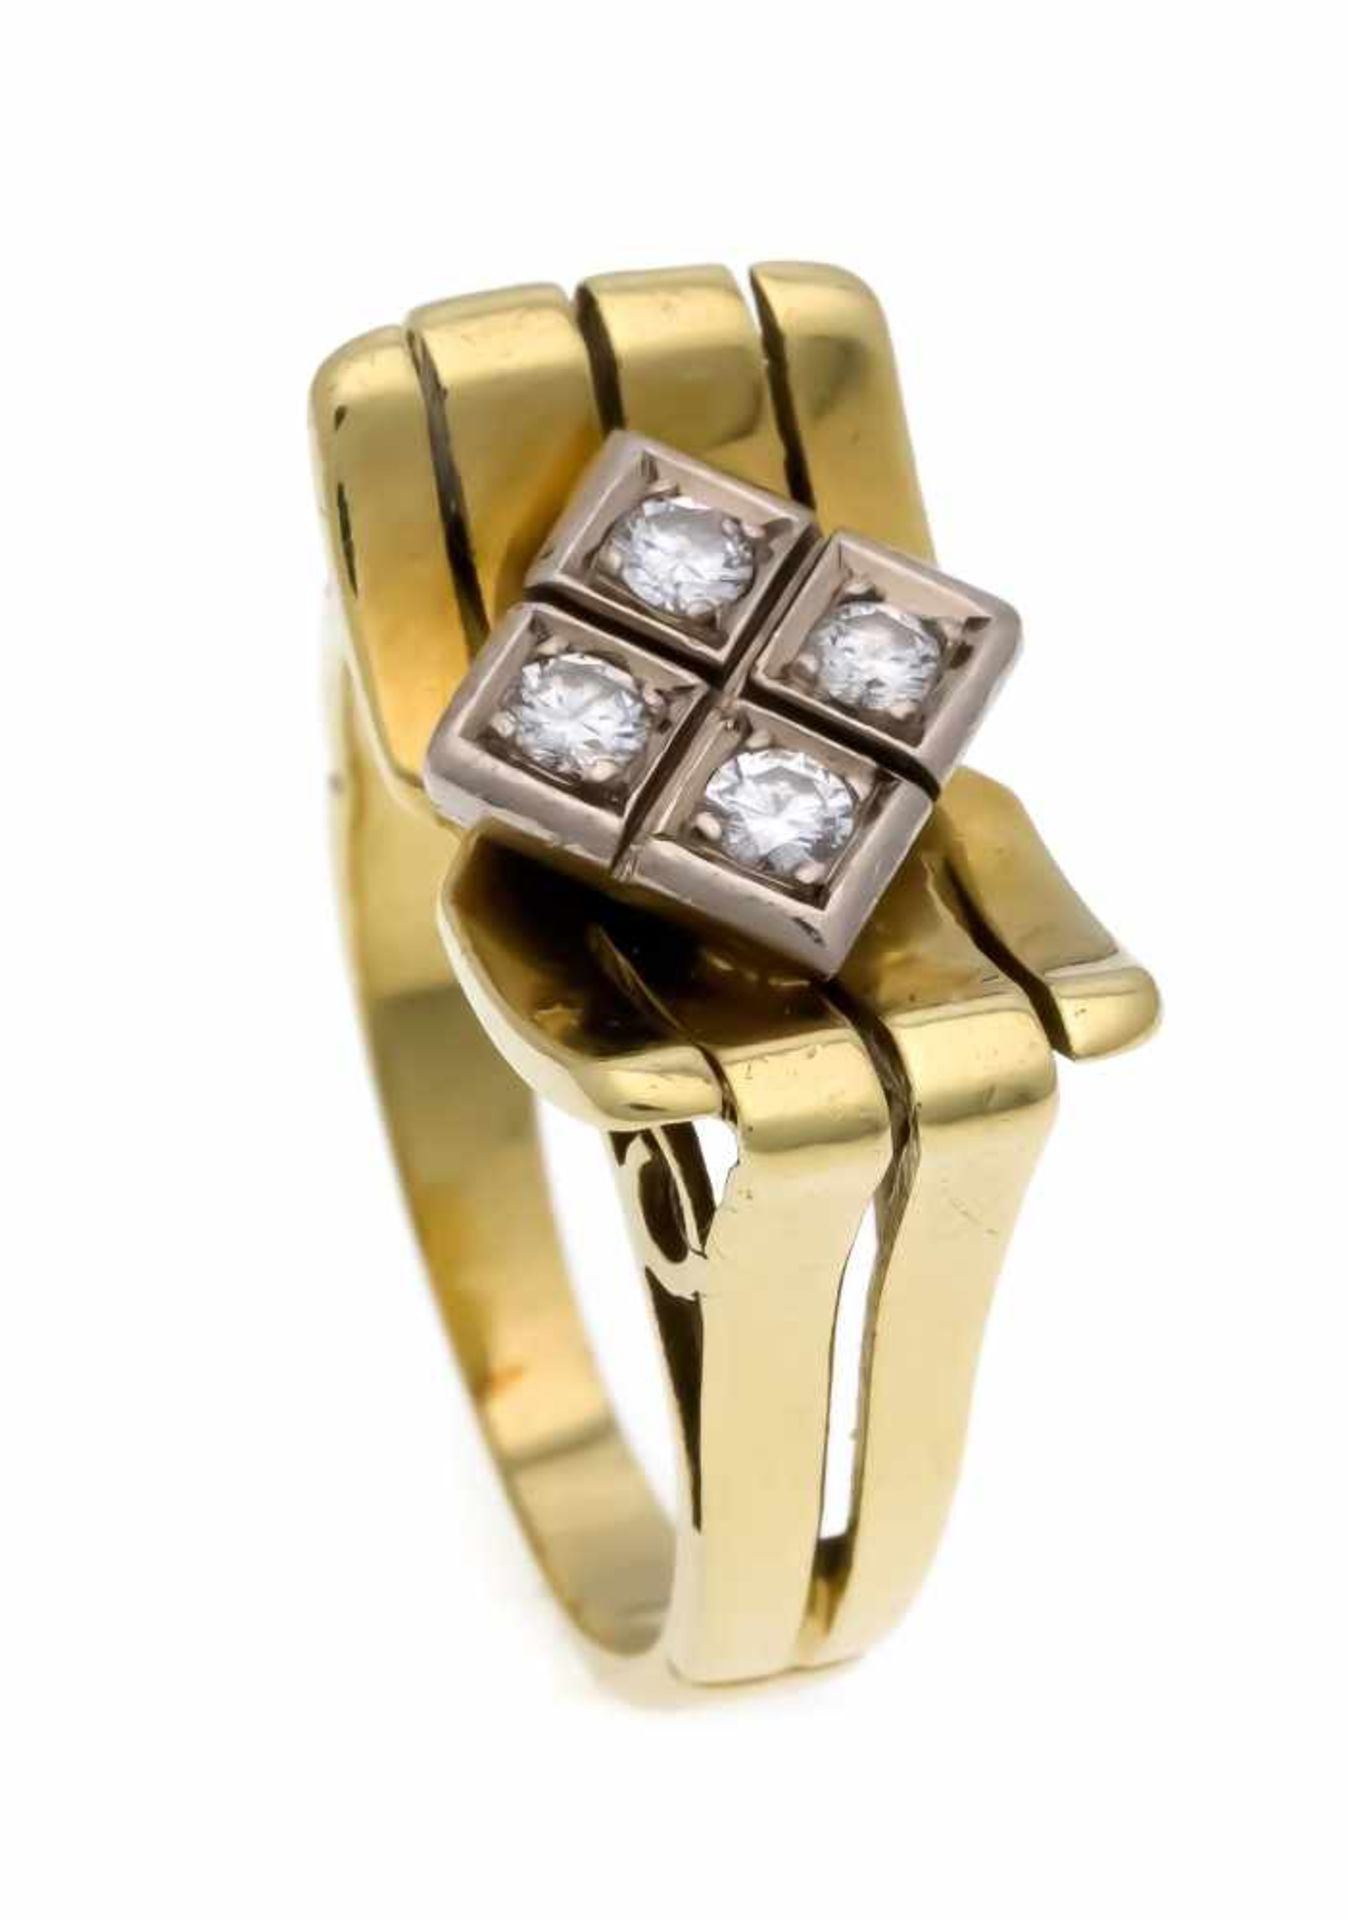 Brilliant ring GG / WG 585/000 with 4 diamonds, total 0.20 ct W / VS-SI, RG 53, 6.6 g